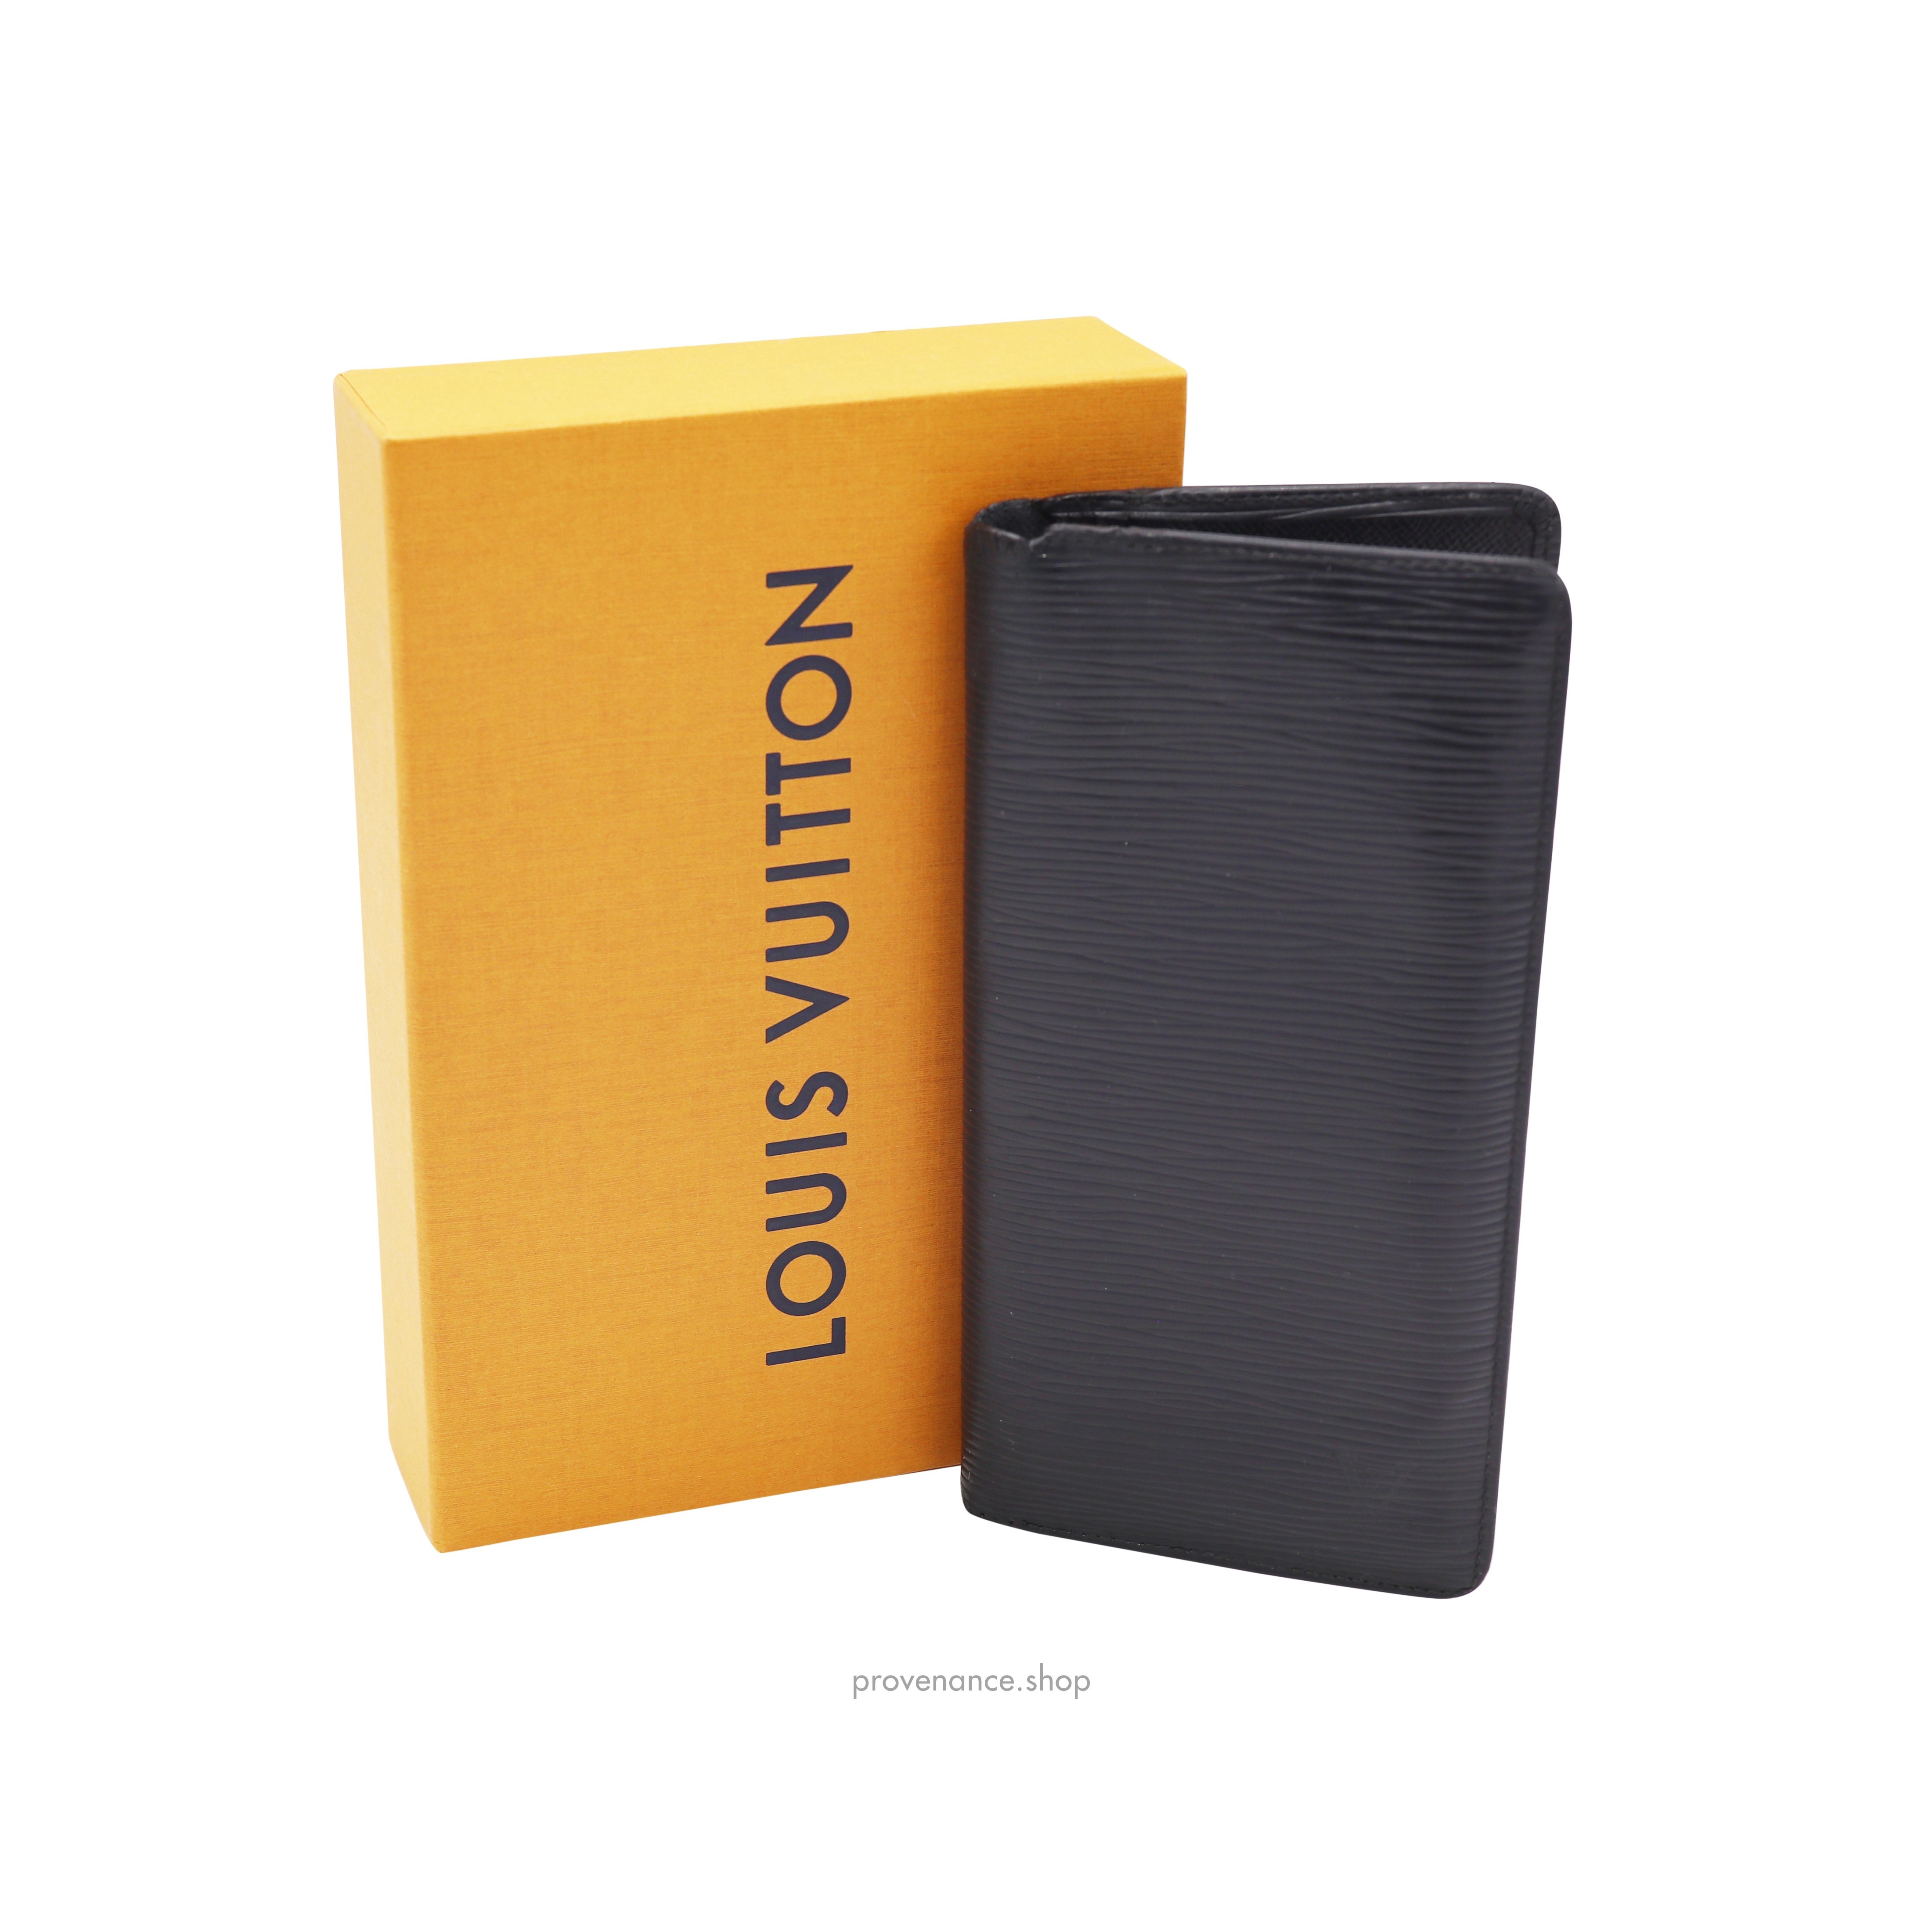 Louis Vuitton Tassil Yellow Epi Leather Marco Bifold Compact Wallet